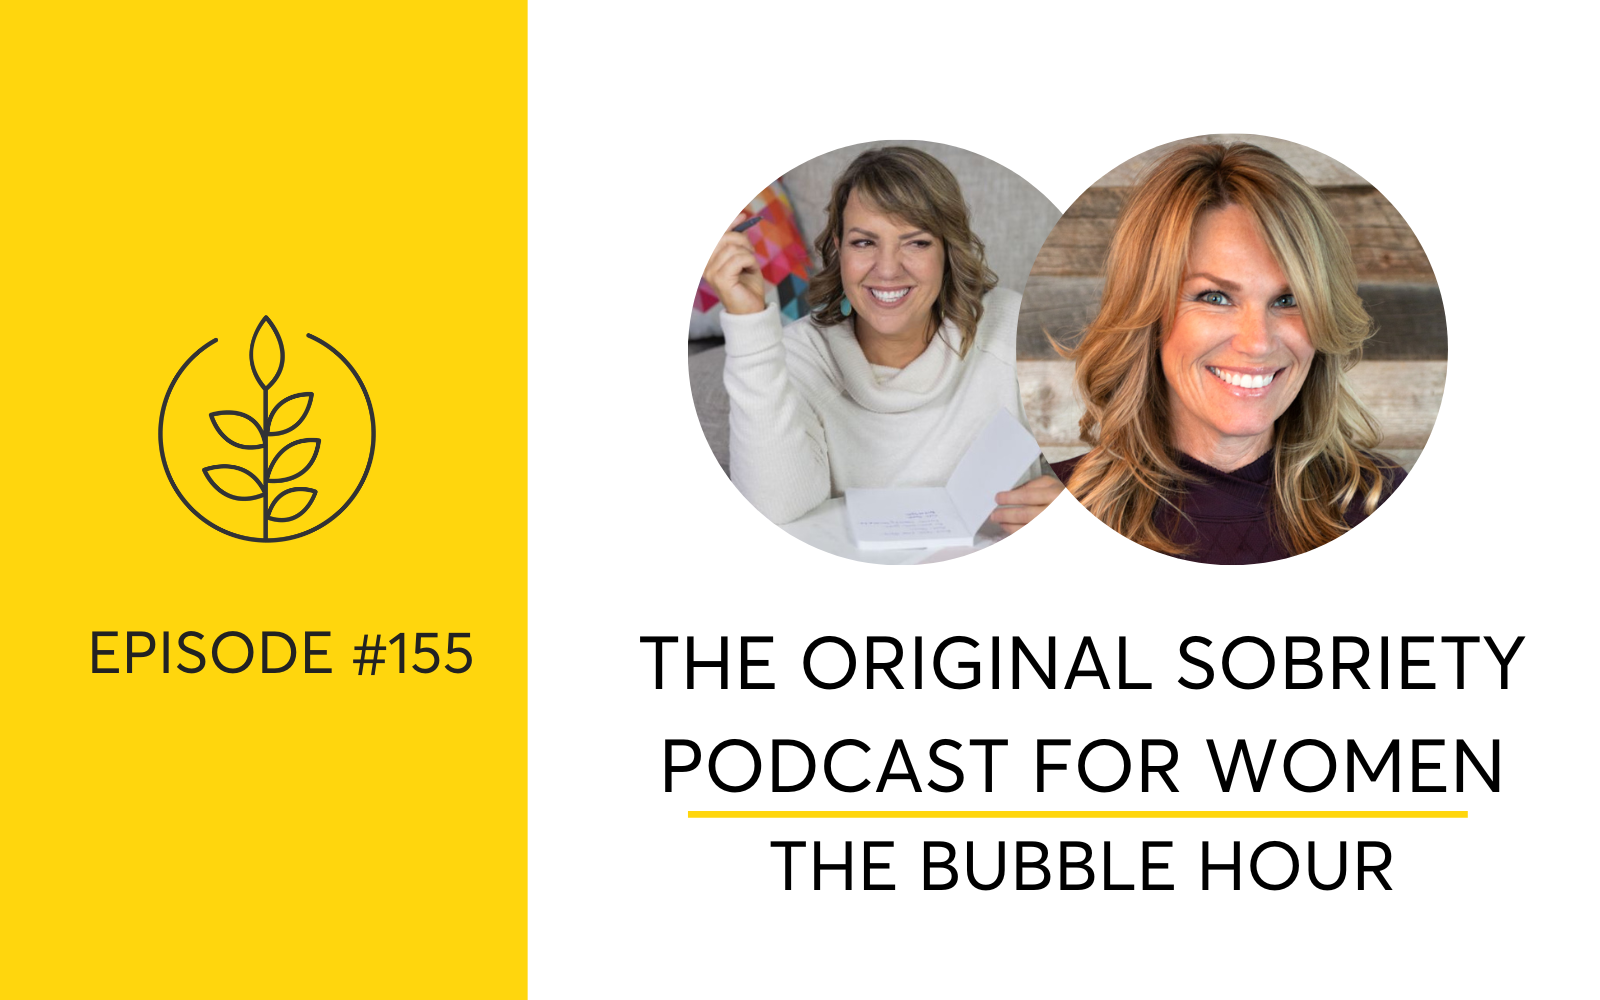 The Original Sobriety Podcast For Women – The Bubble Hour